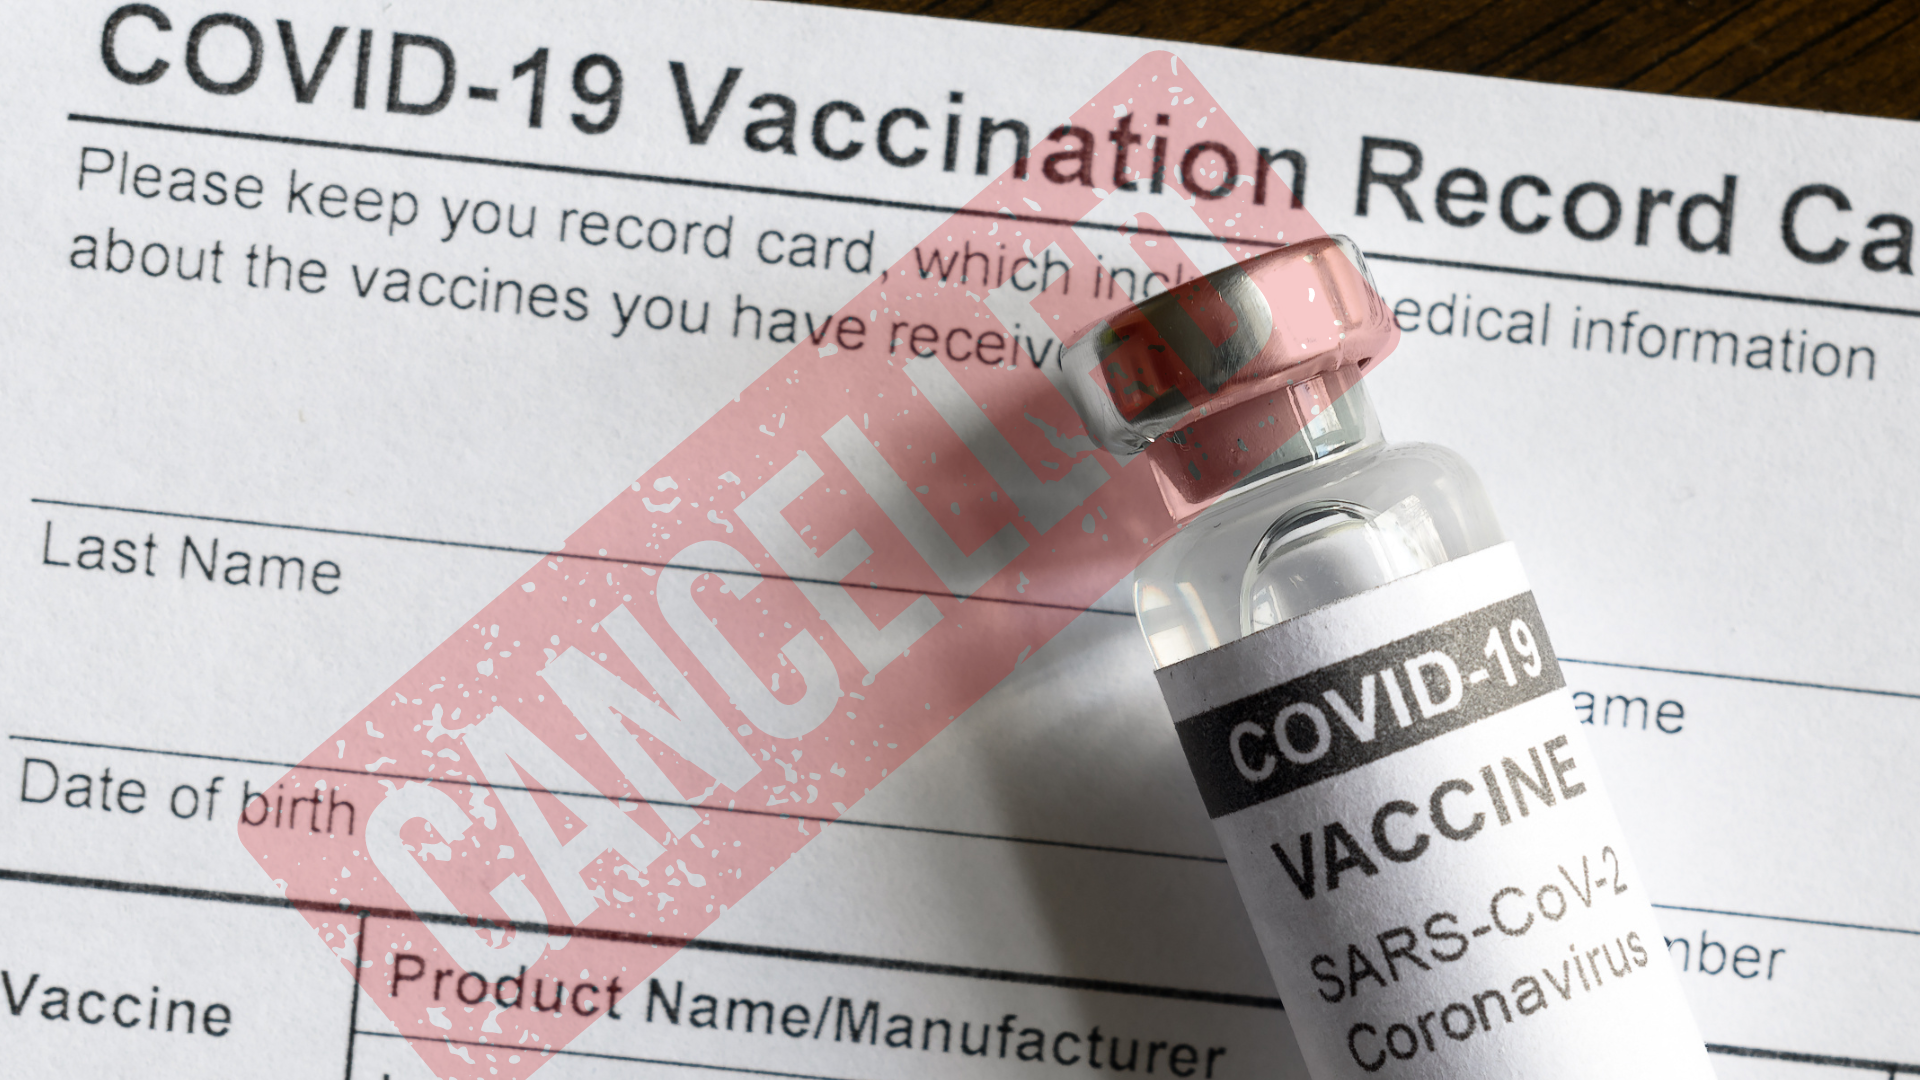 CBP No Longer Requires Proof of COVID-19 Vaccination for Air Passengers from Any Country